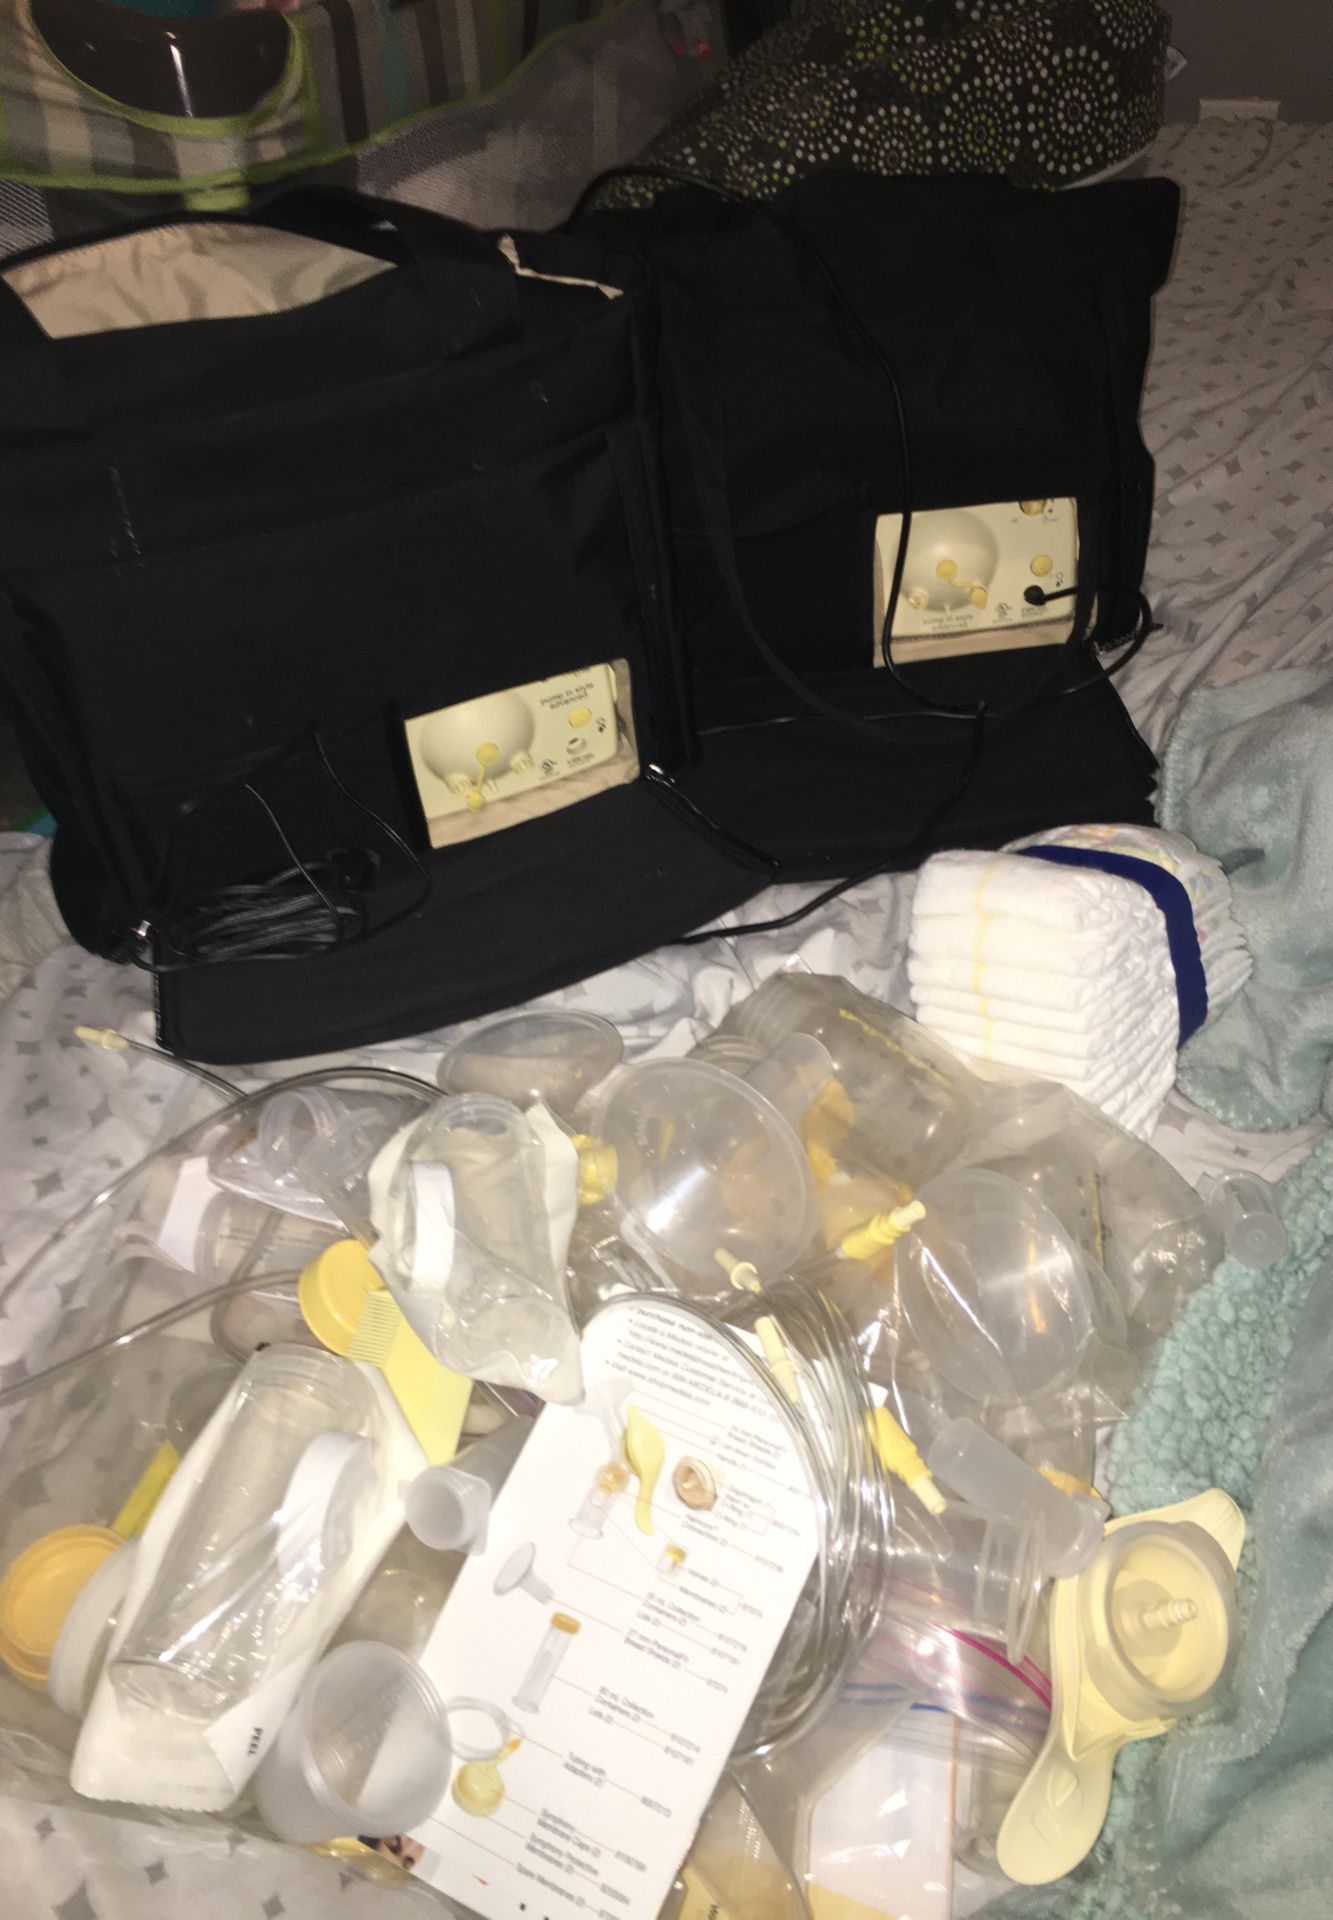 2 medela breast feeding pump complete and more